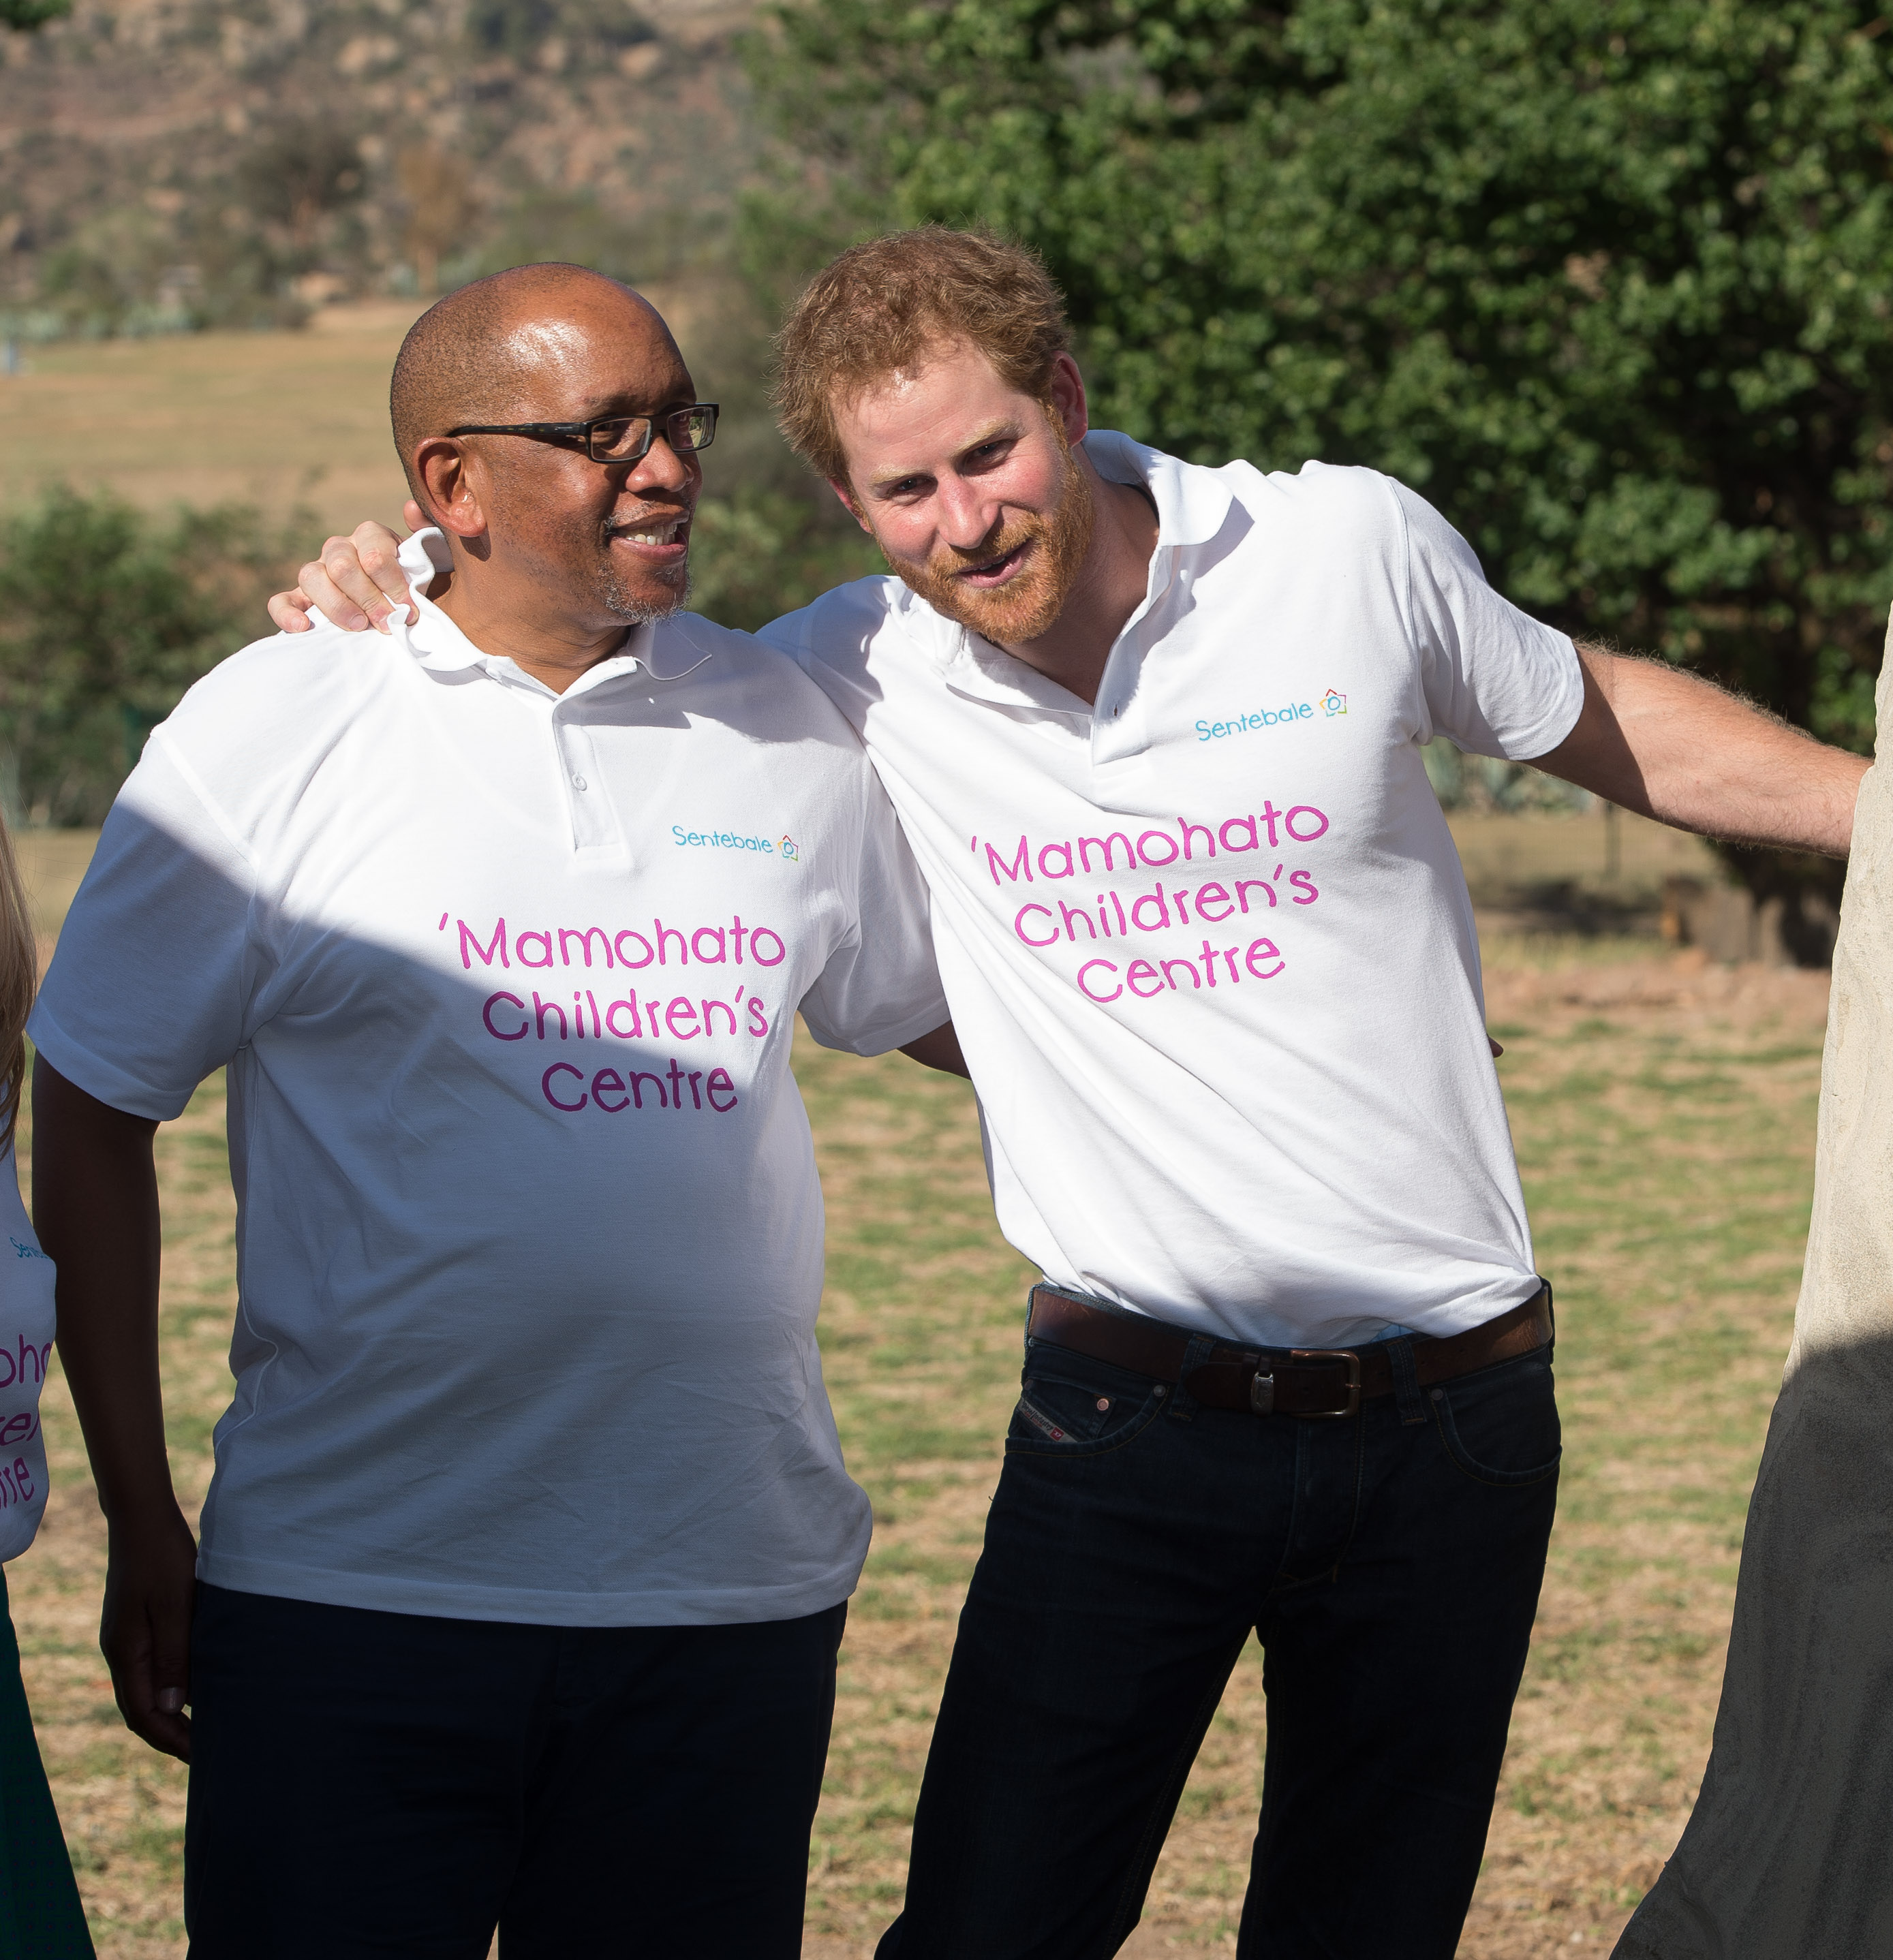 Prince Harry and Prince Seeiso at the opening of Sentebale's Mamohato Children's Centre in Maseru, Lesotho on November 26, 2015 | Source: Getty Images